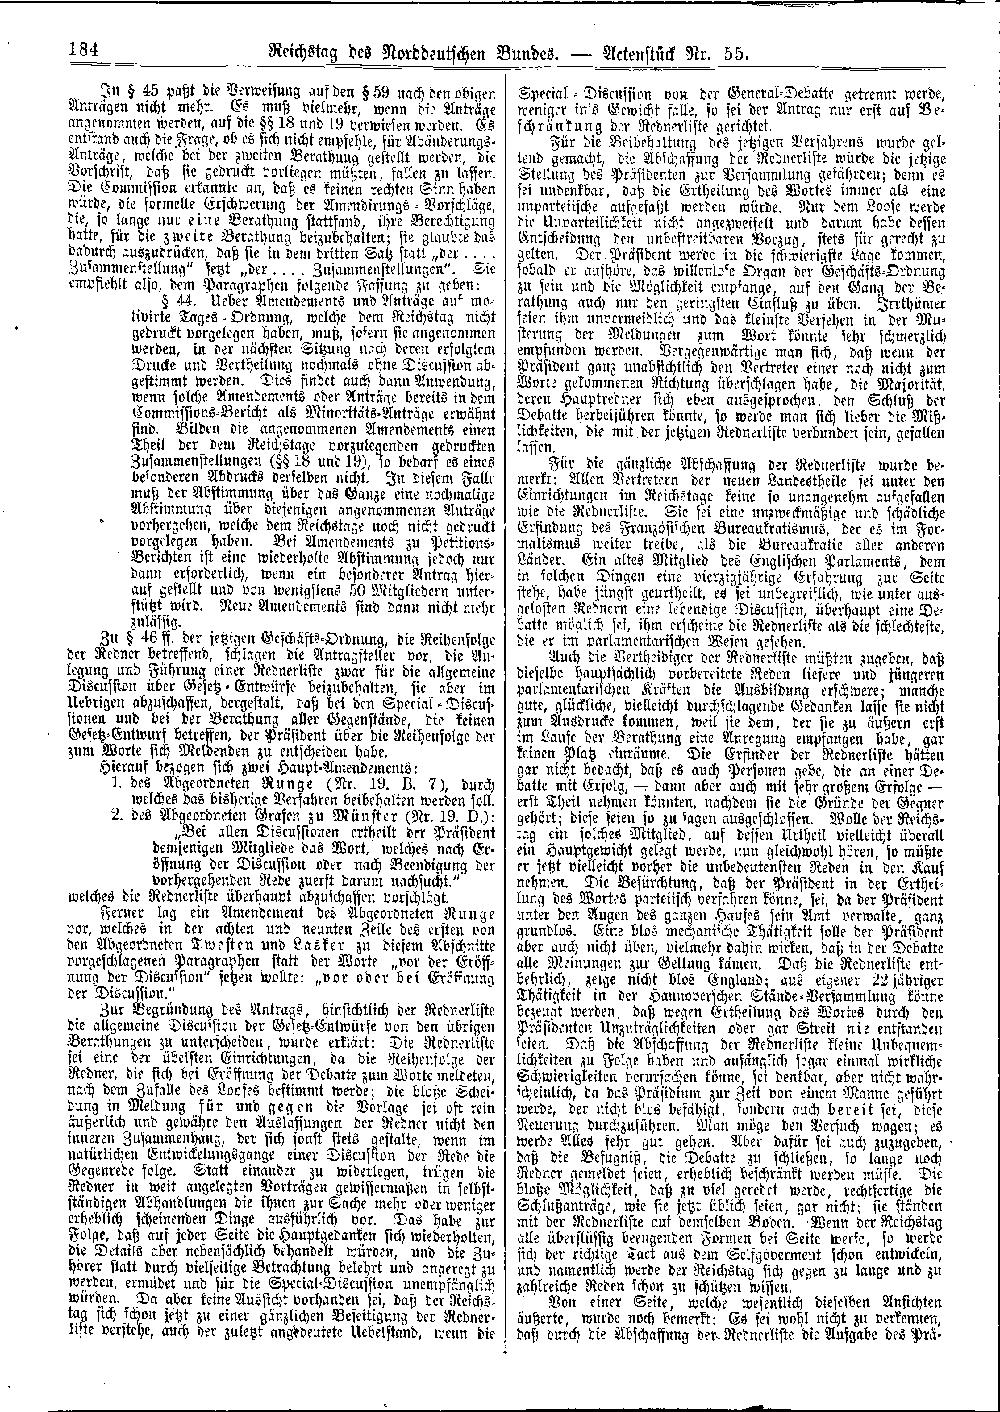 Scan of page 184